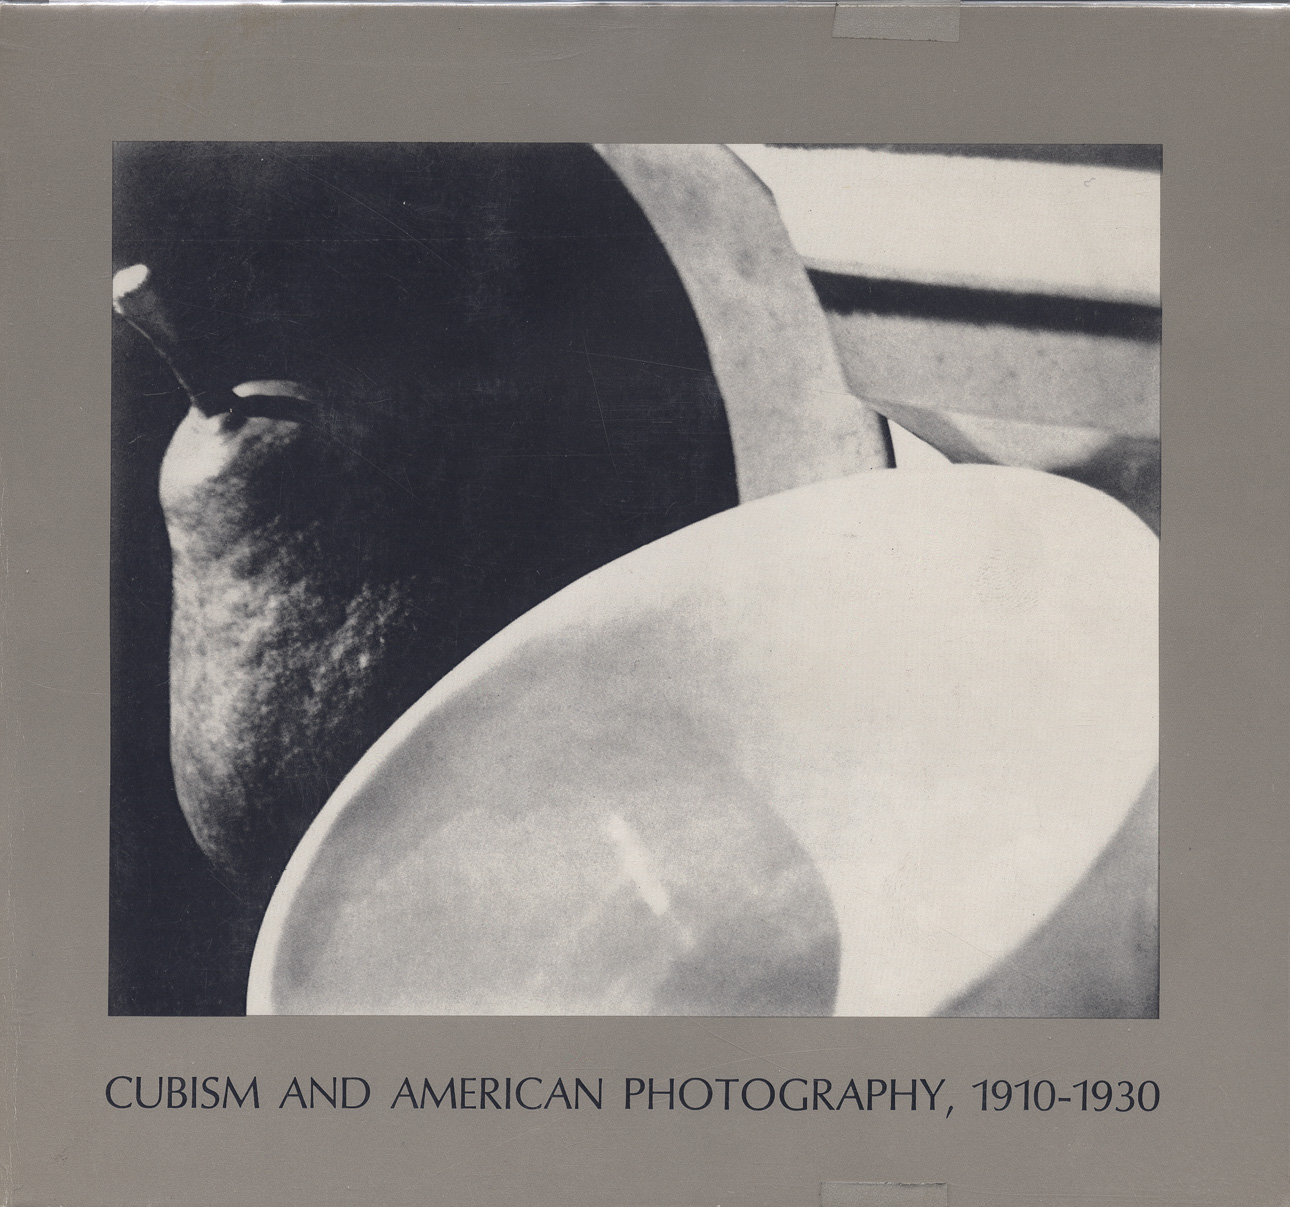 Cubism & American Photography, 1910-1930